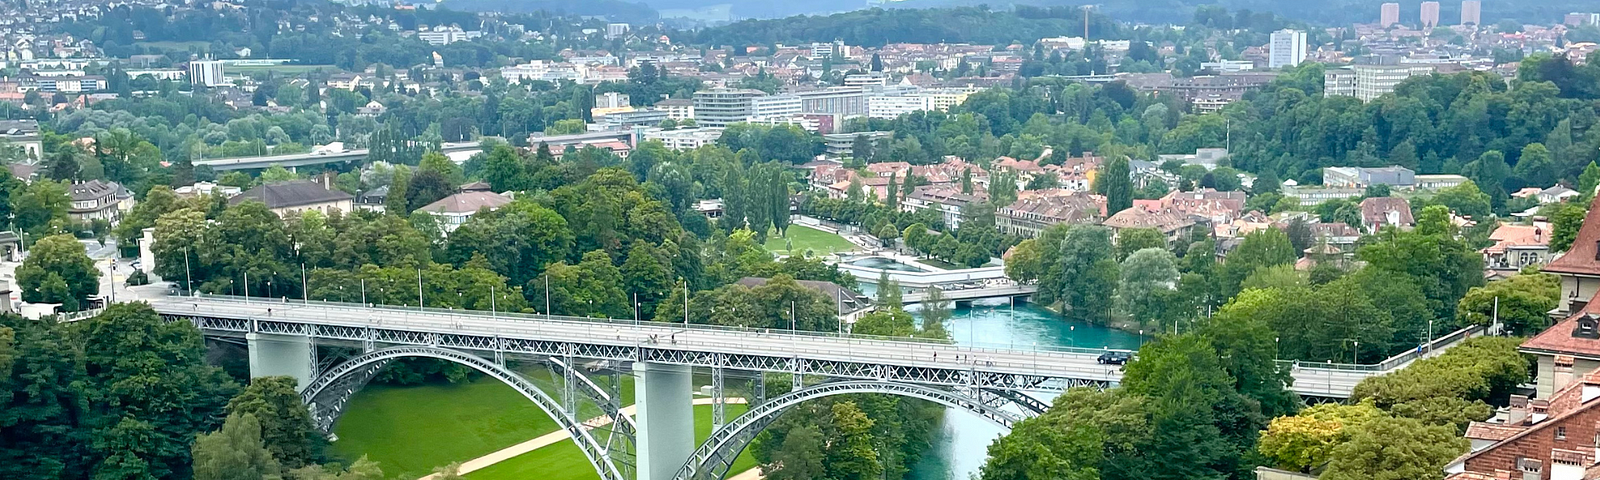 City of Bern taken from the cathedral. Article on Bern, Switzerland by Elise Chidley